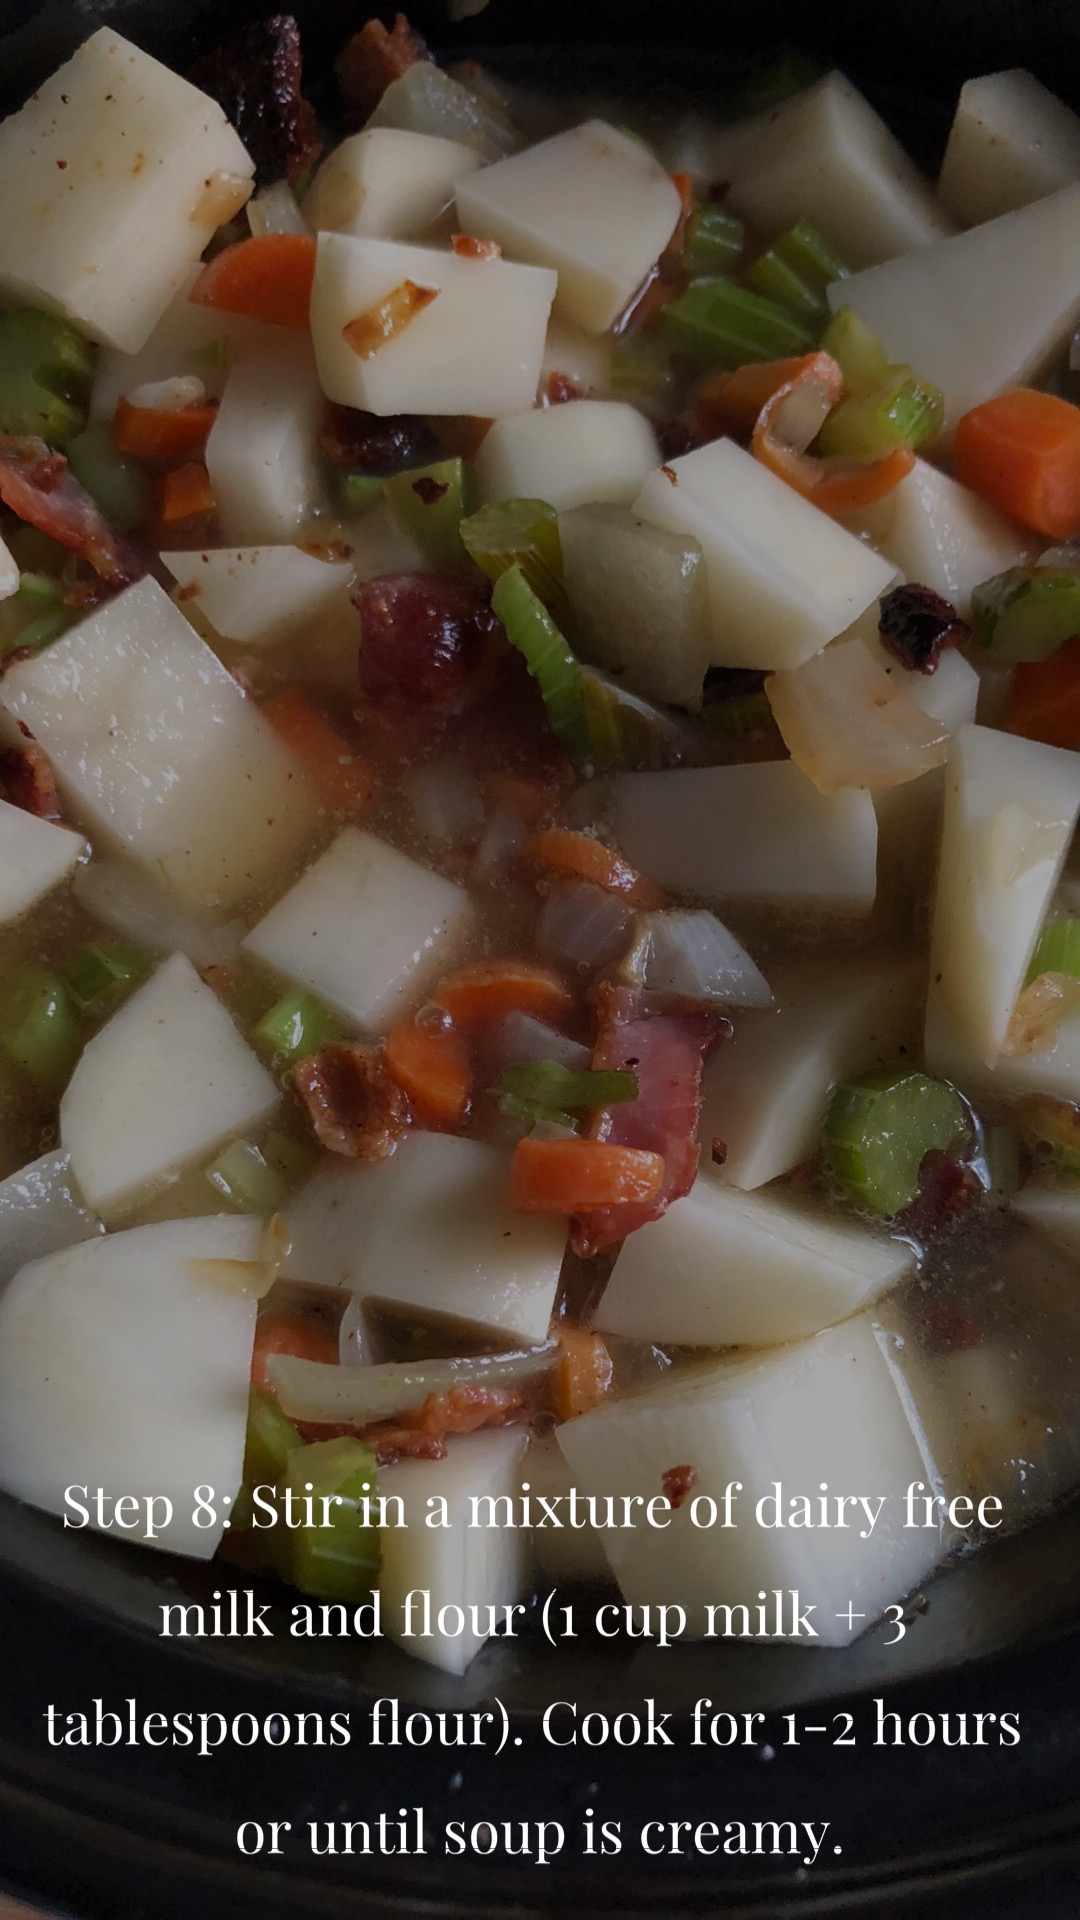 Stir in mixture of dairy free milk and flour - text - over a picture of potatoes, bacon, carrots, celery in broth